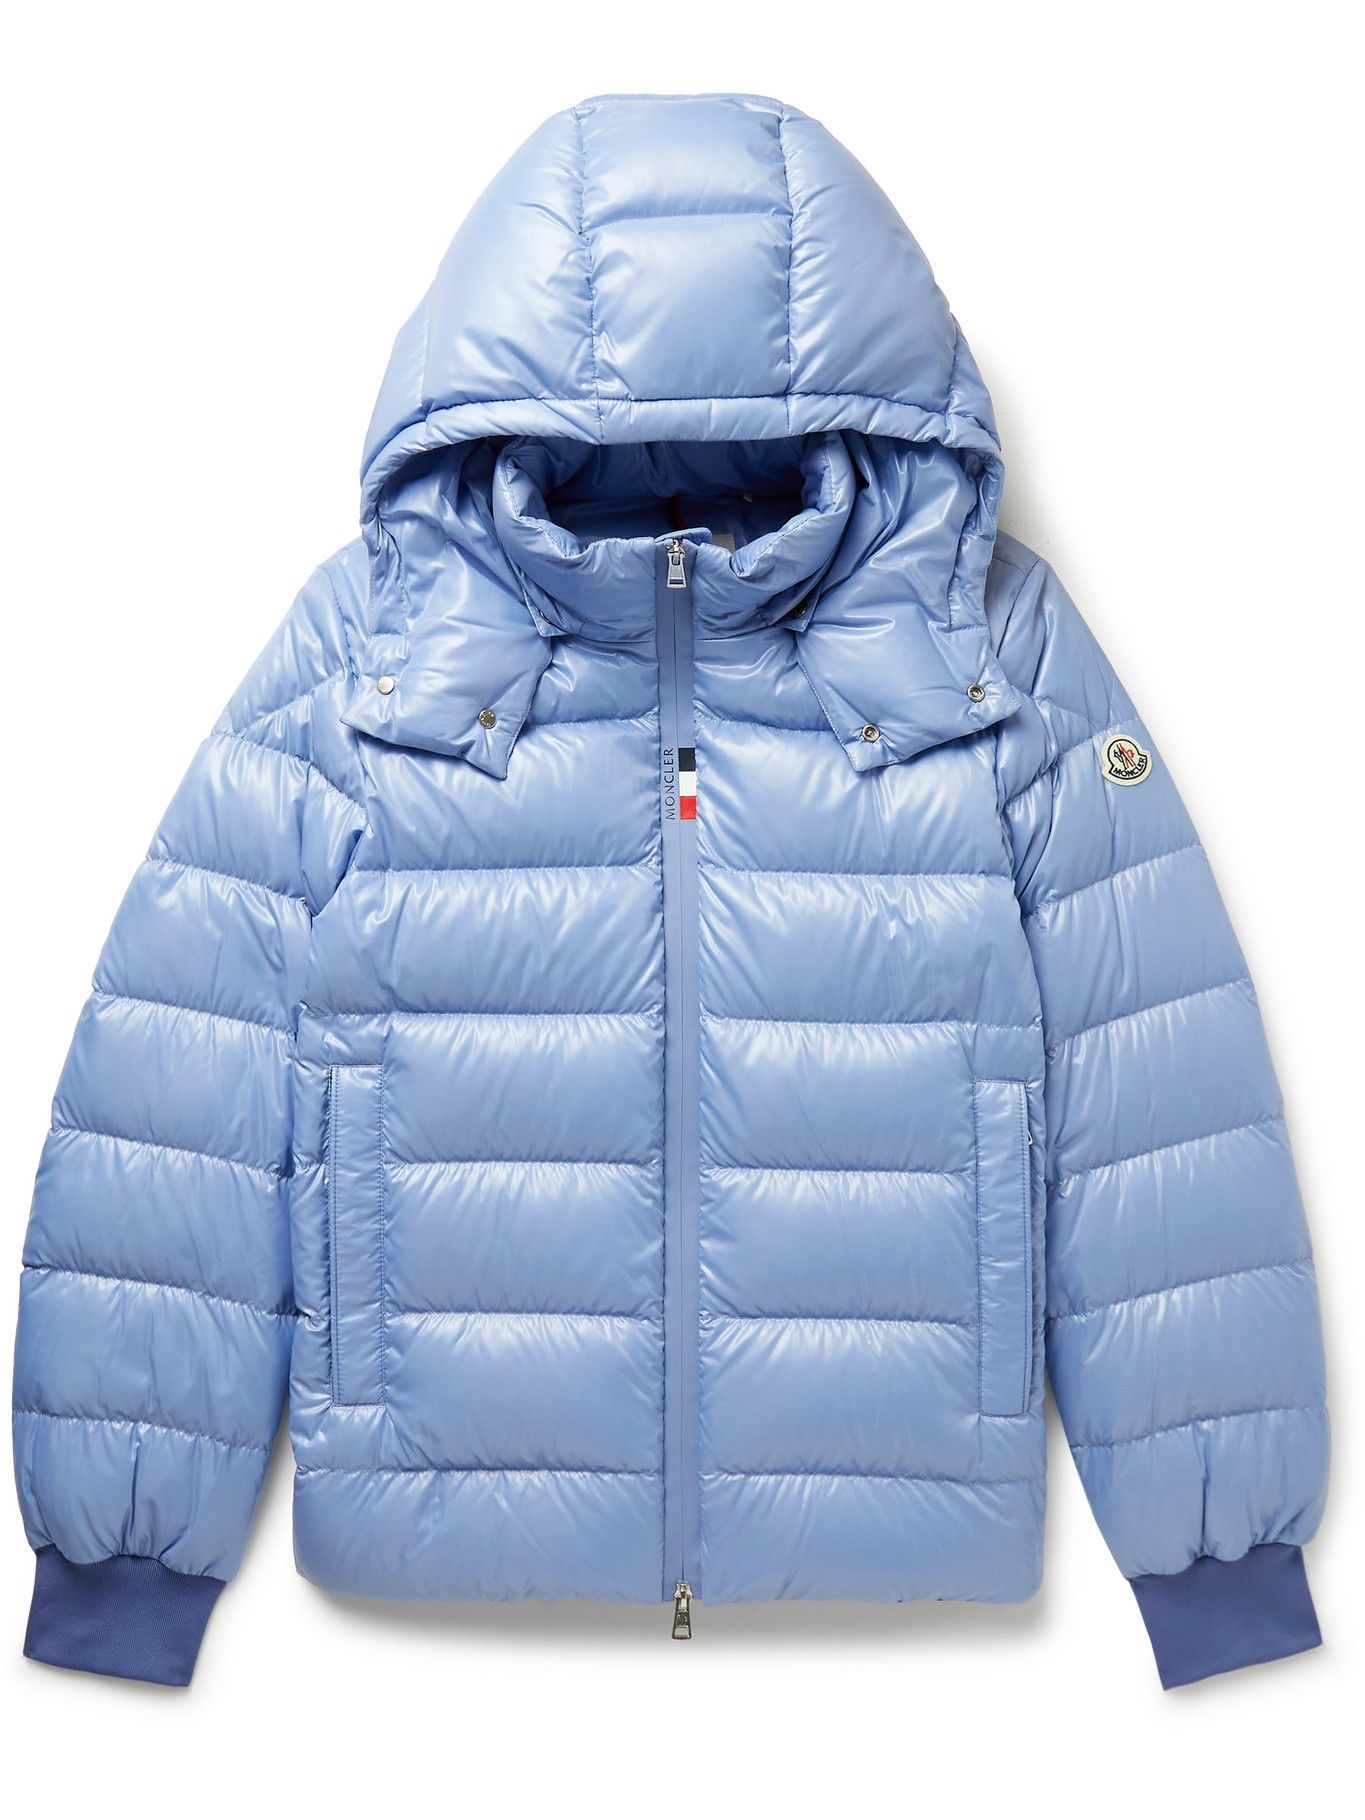 Moncler - Cuvellier Quilted Shell Down Jacket - Blue Moncler